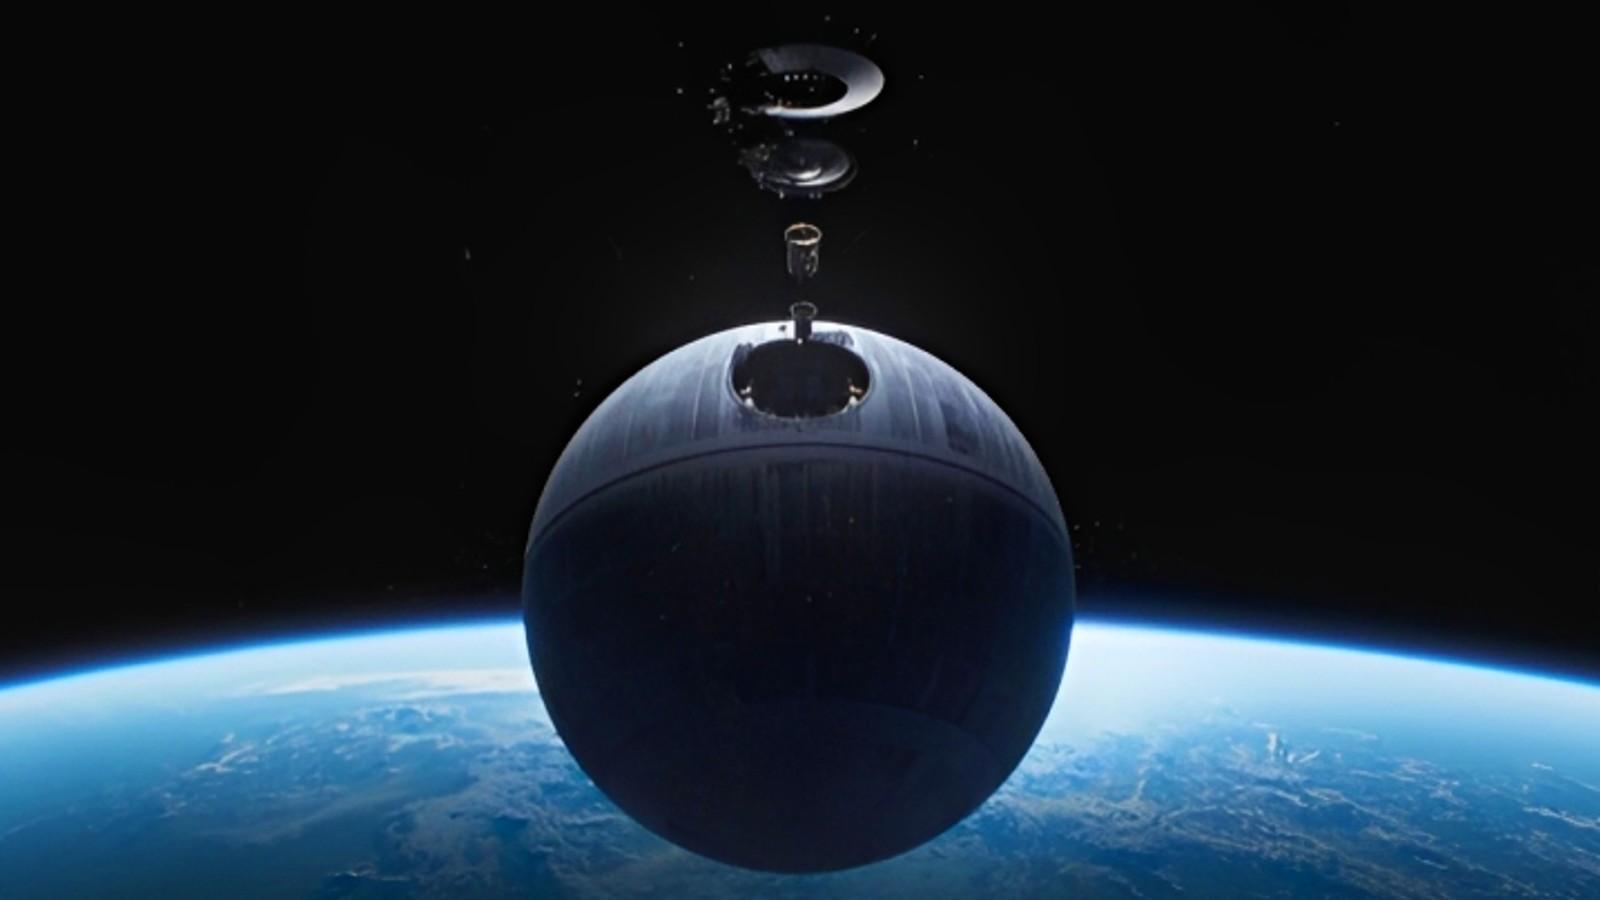 The Death Star in Andor Episode 12